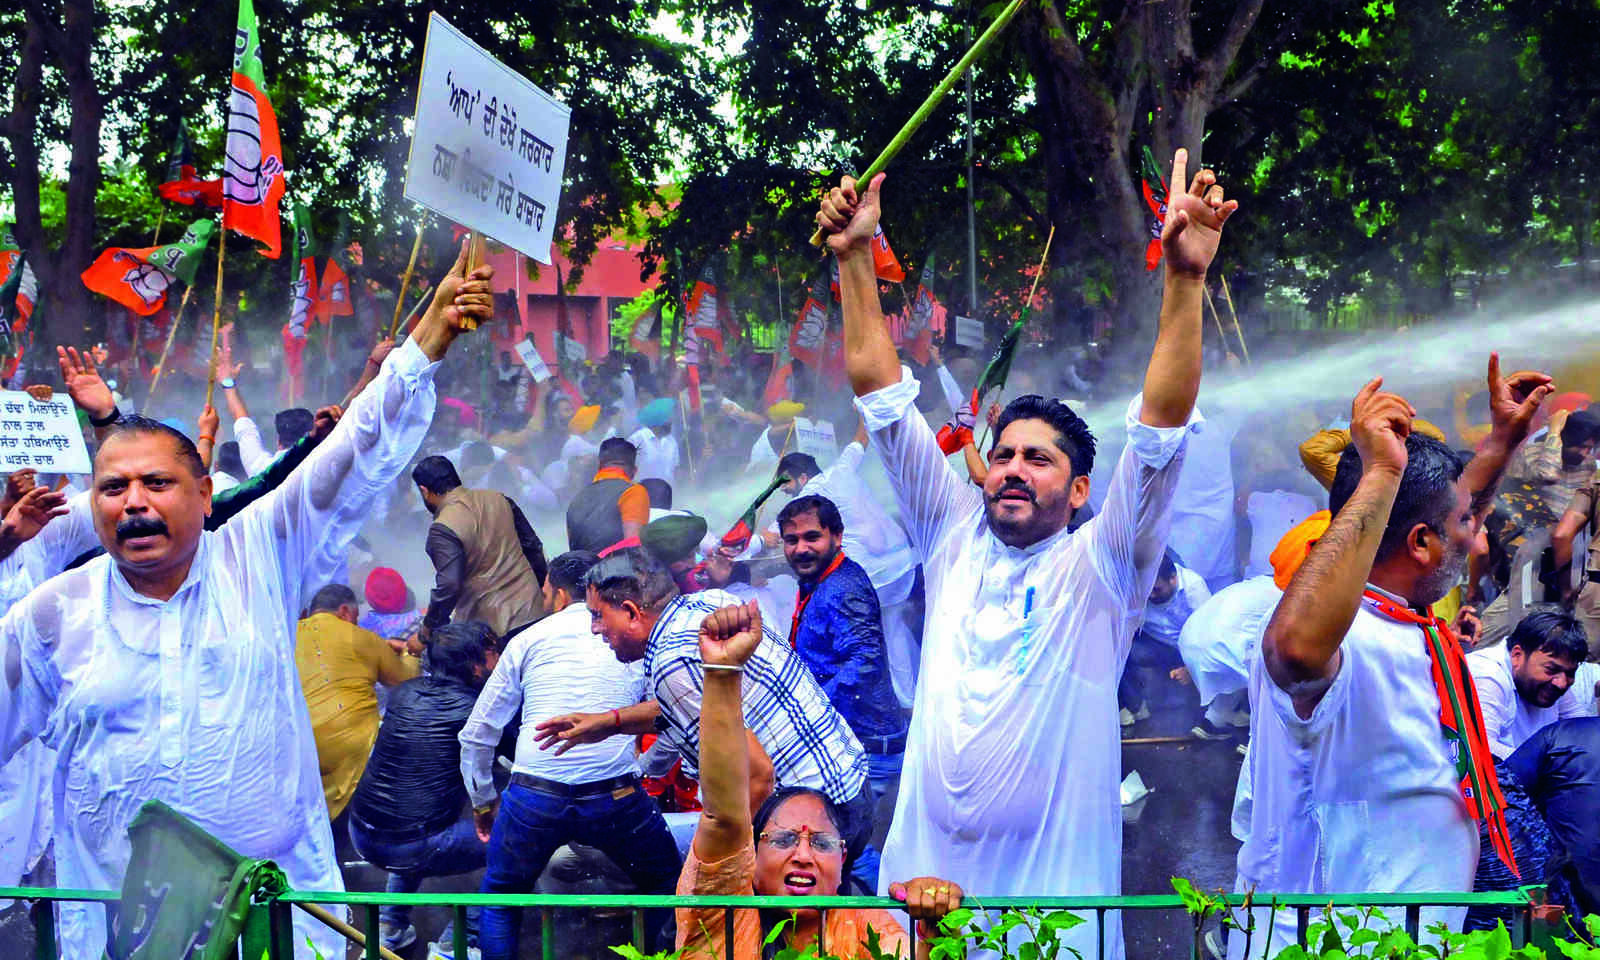 Police use water cannon on Punjab BJP leaders, workers as they try to march to Vidhan Sabha